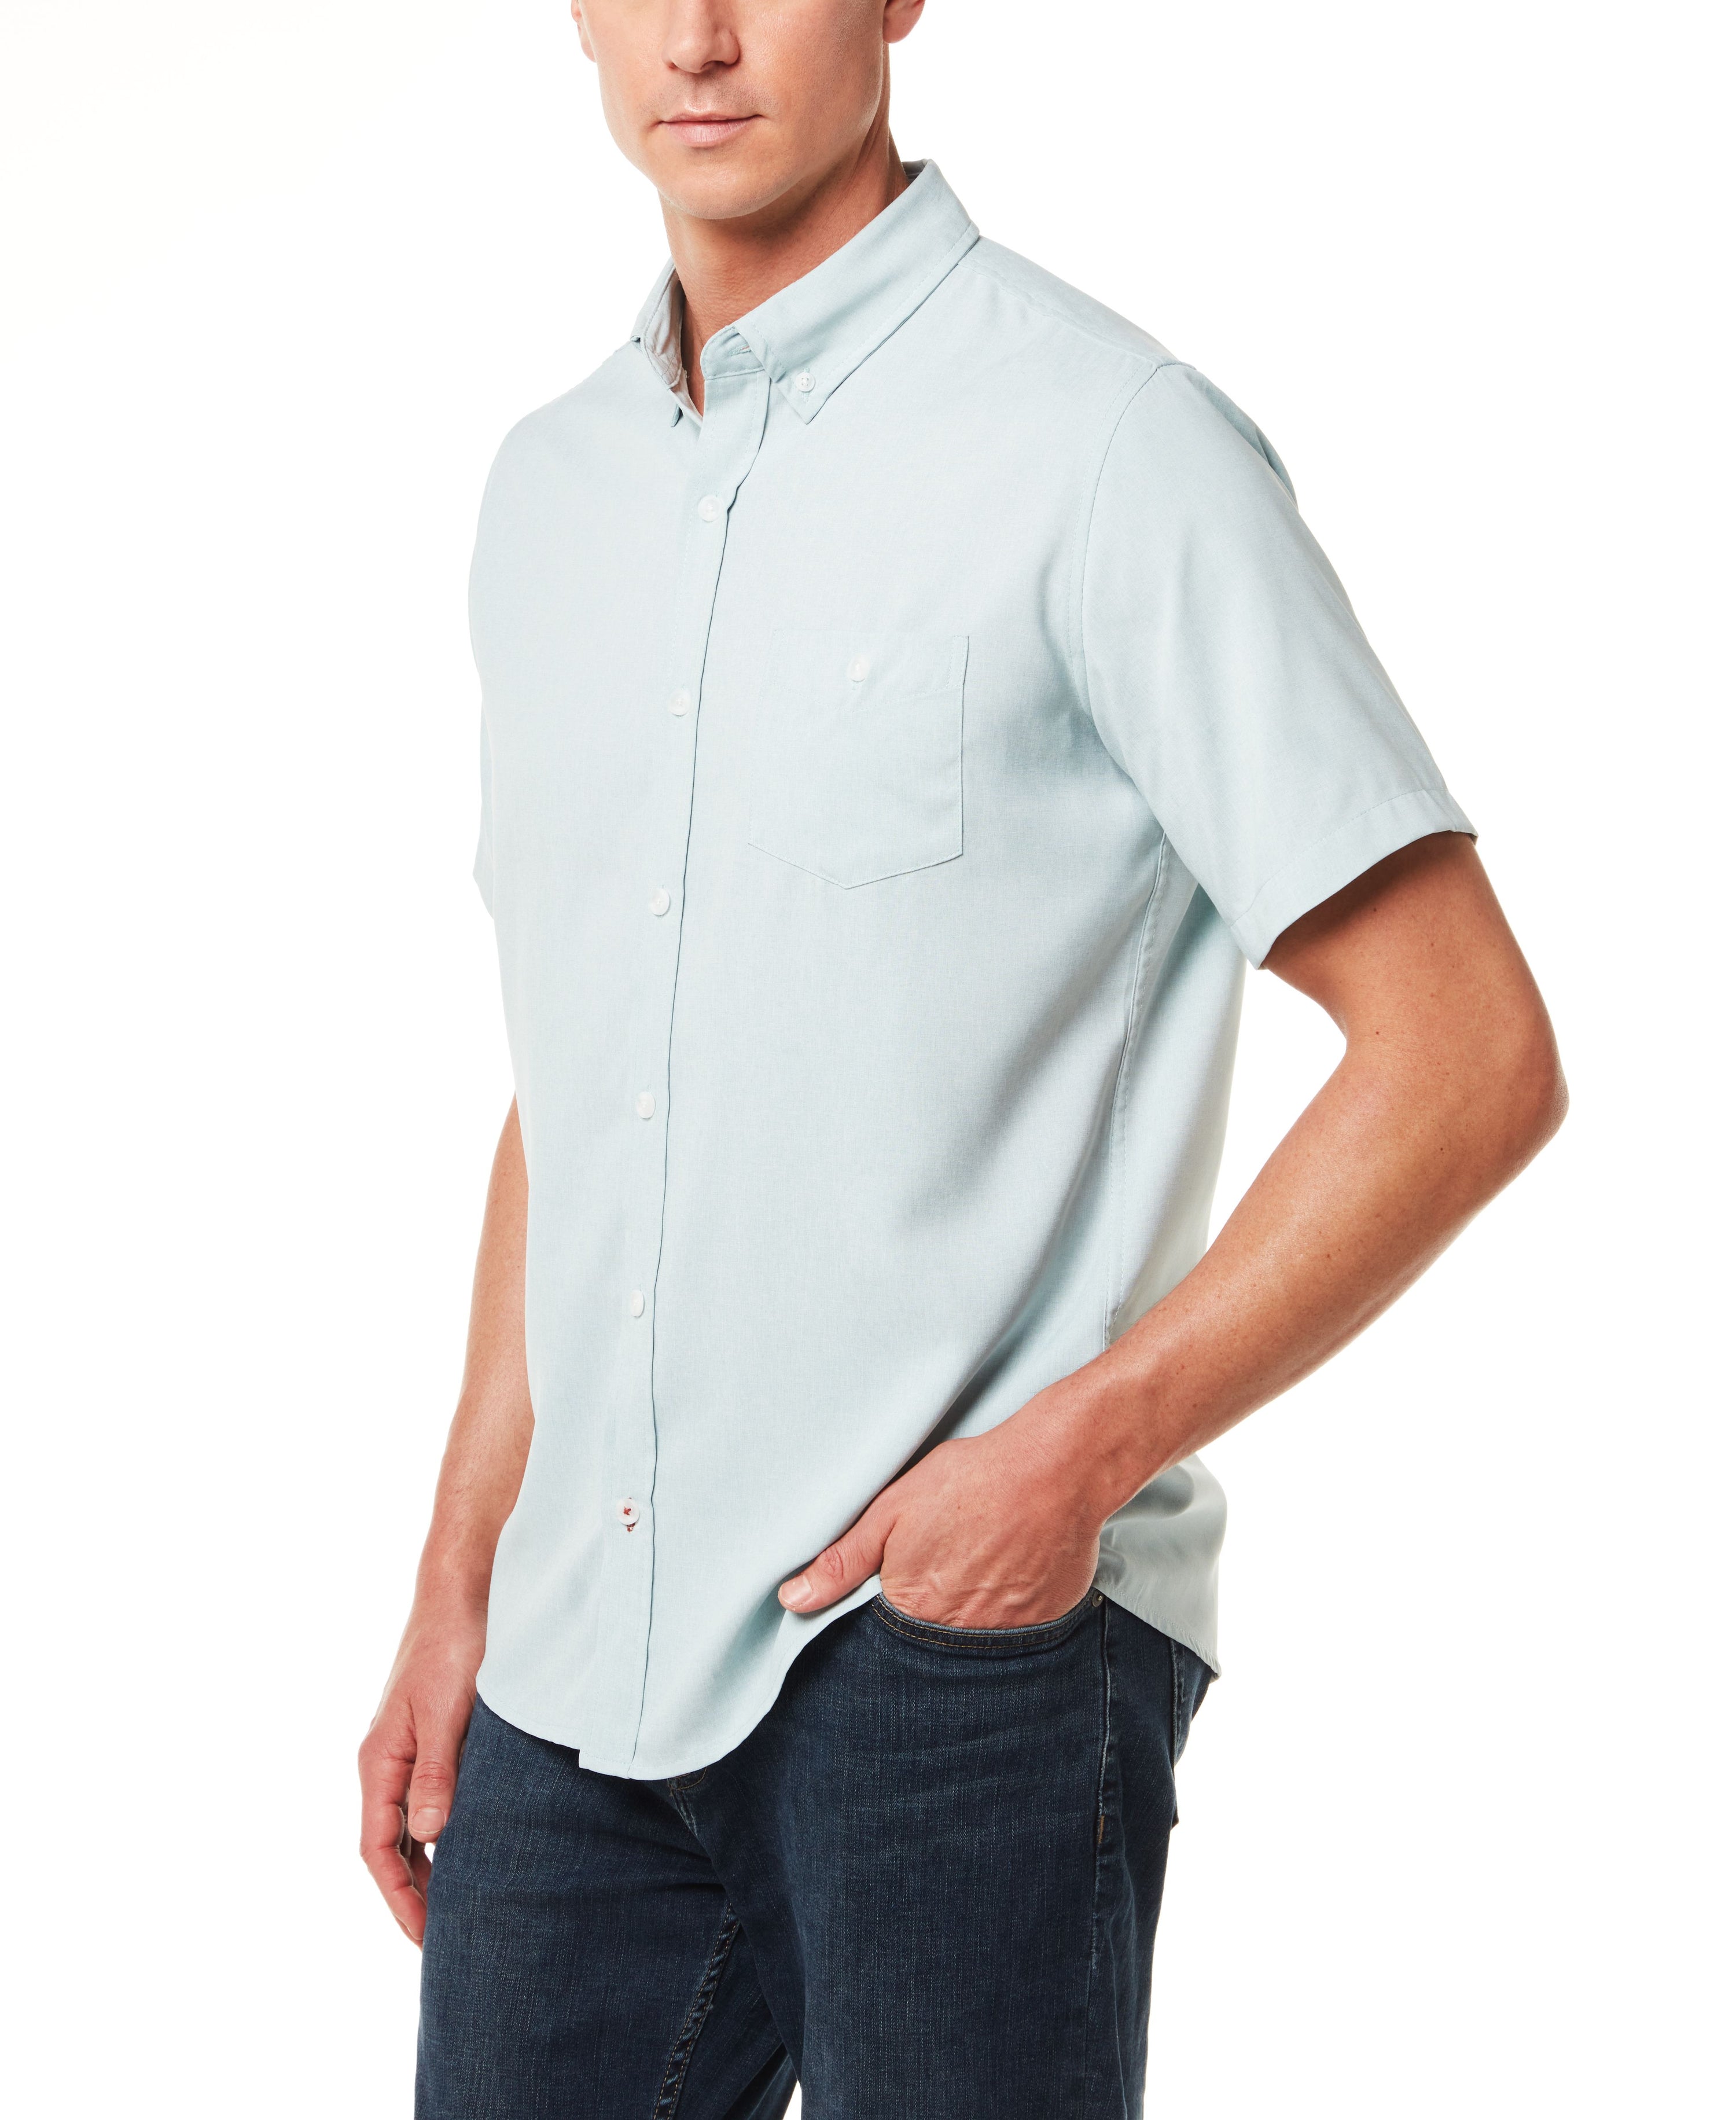 Performance Shirt in Sterling Blue